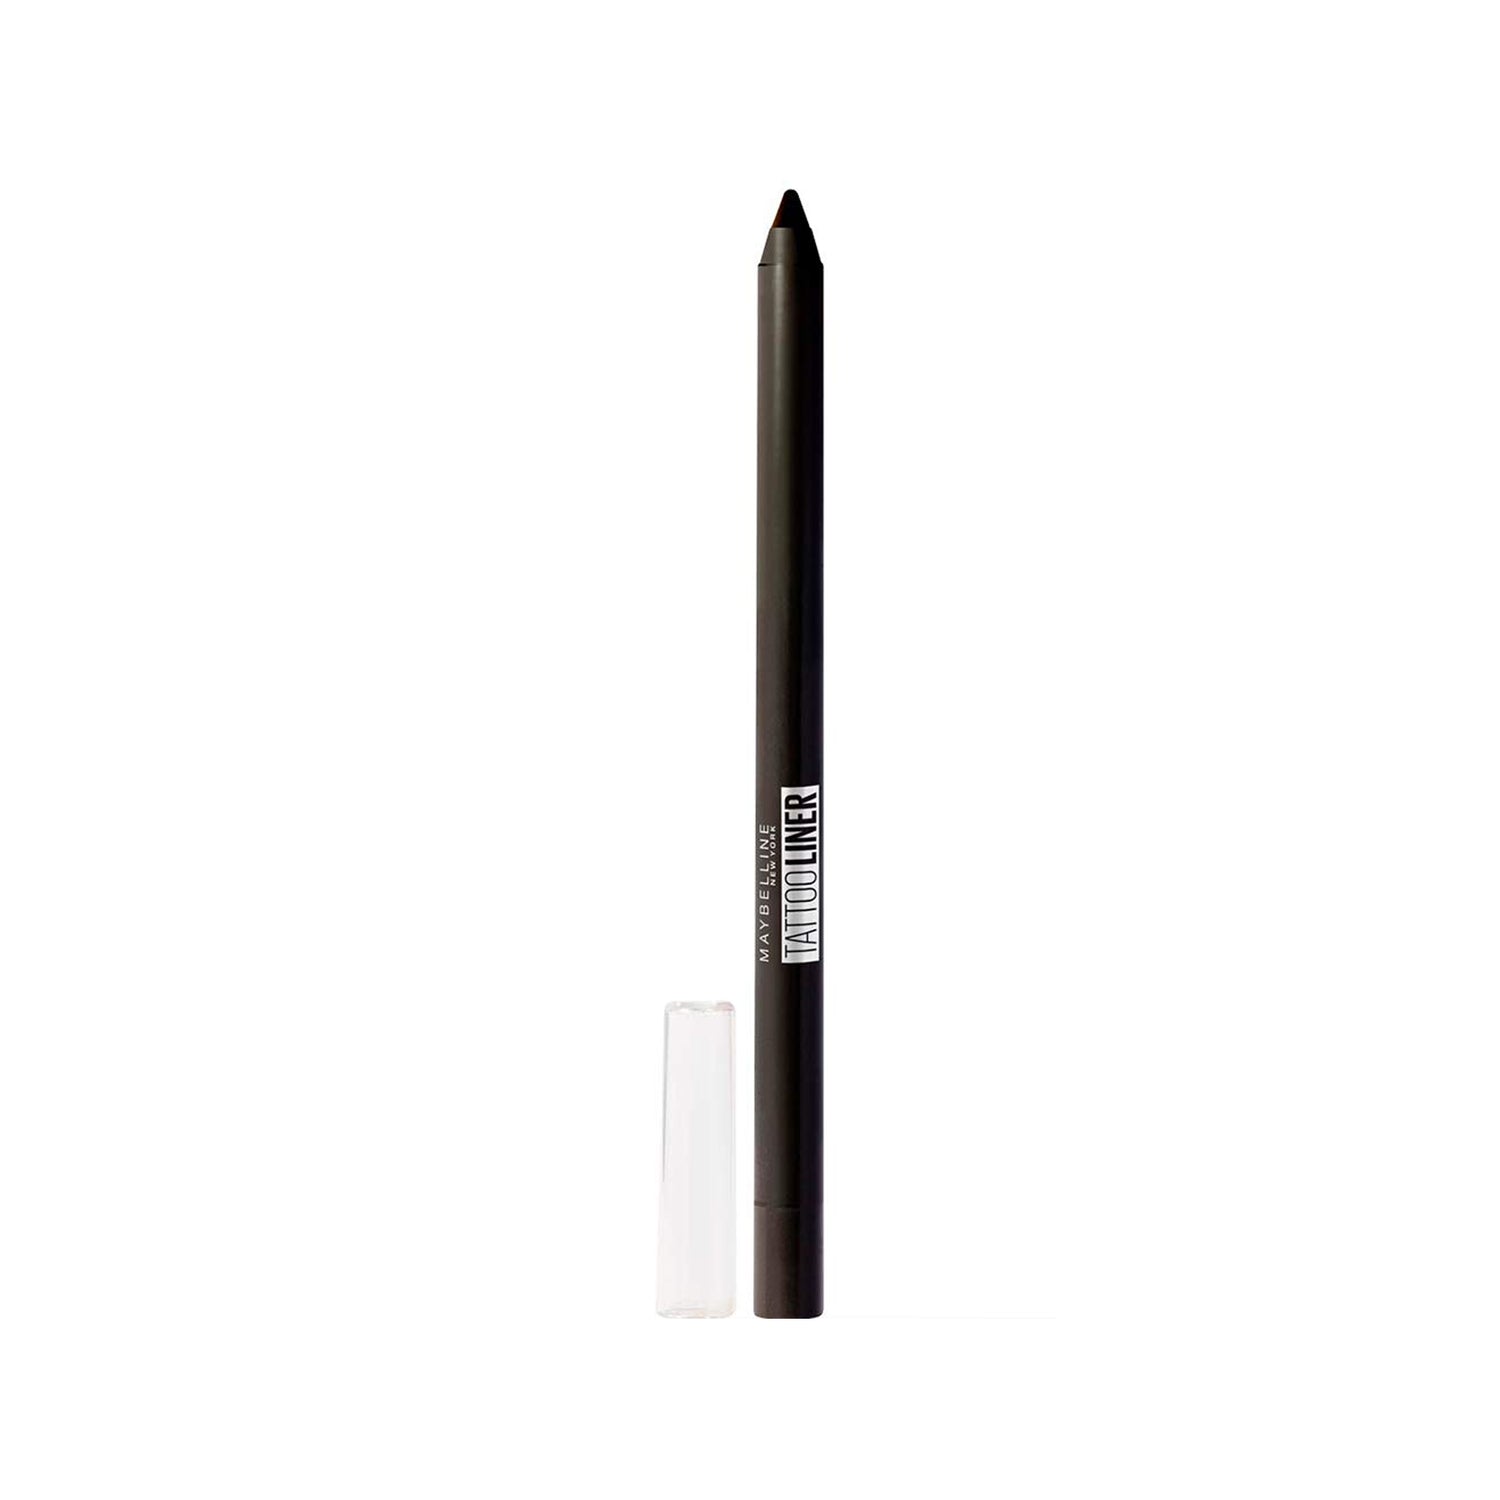 Crayon pour les yeux Maybelline Tattoo Liner n° 900 Onyx profond